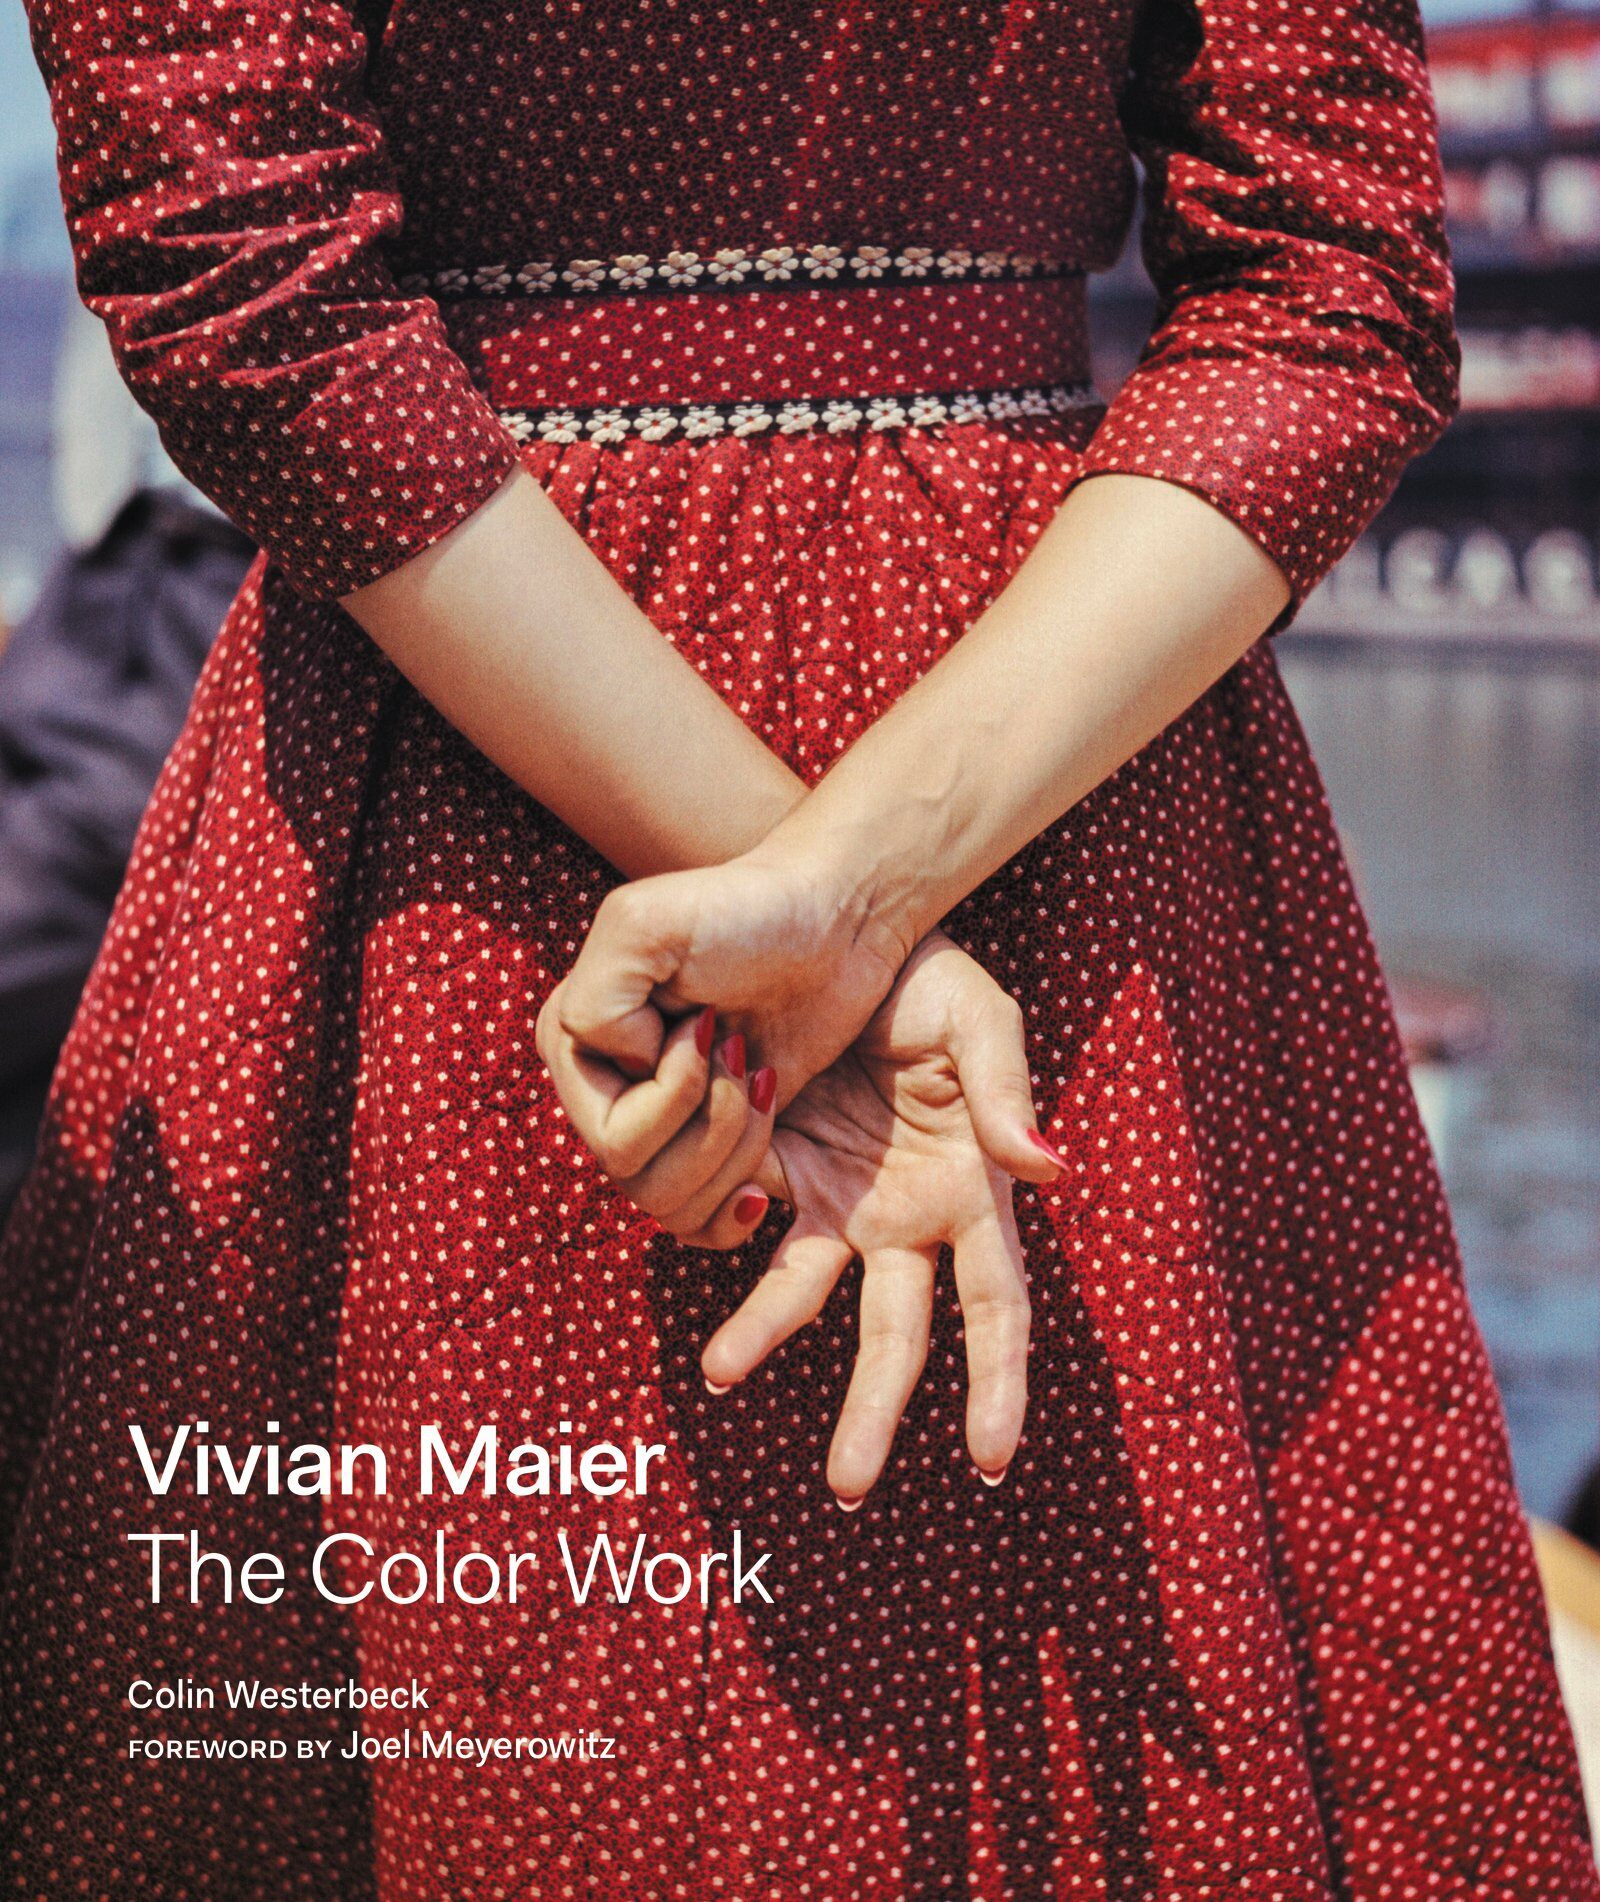 Vivian Maier: The Color Work (Hardcover)